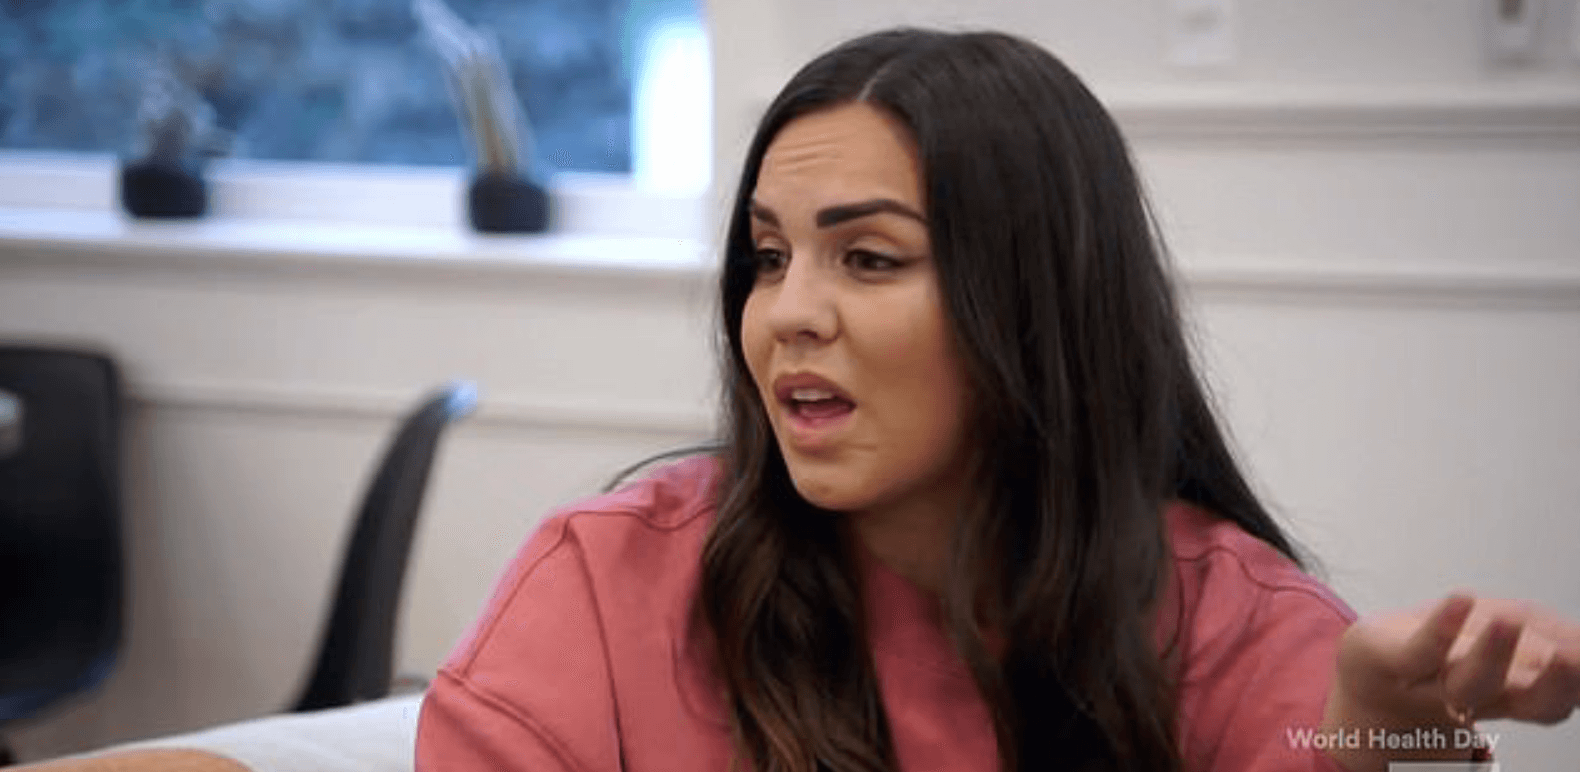 RECAP: Tom Schwartz Apologizes For Saying He’s Utterly Disgusted With Katie On ‘Vanderpump Rules’